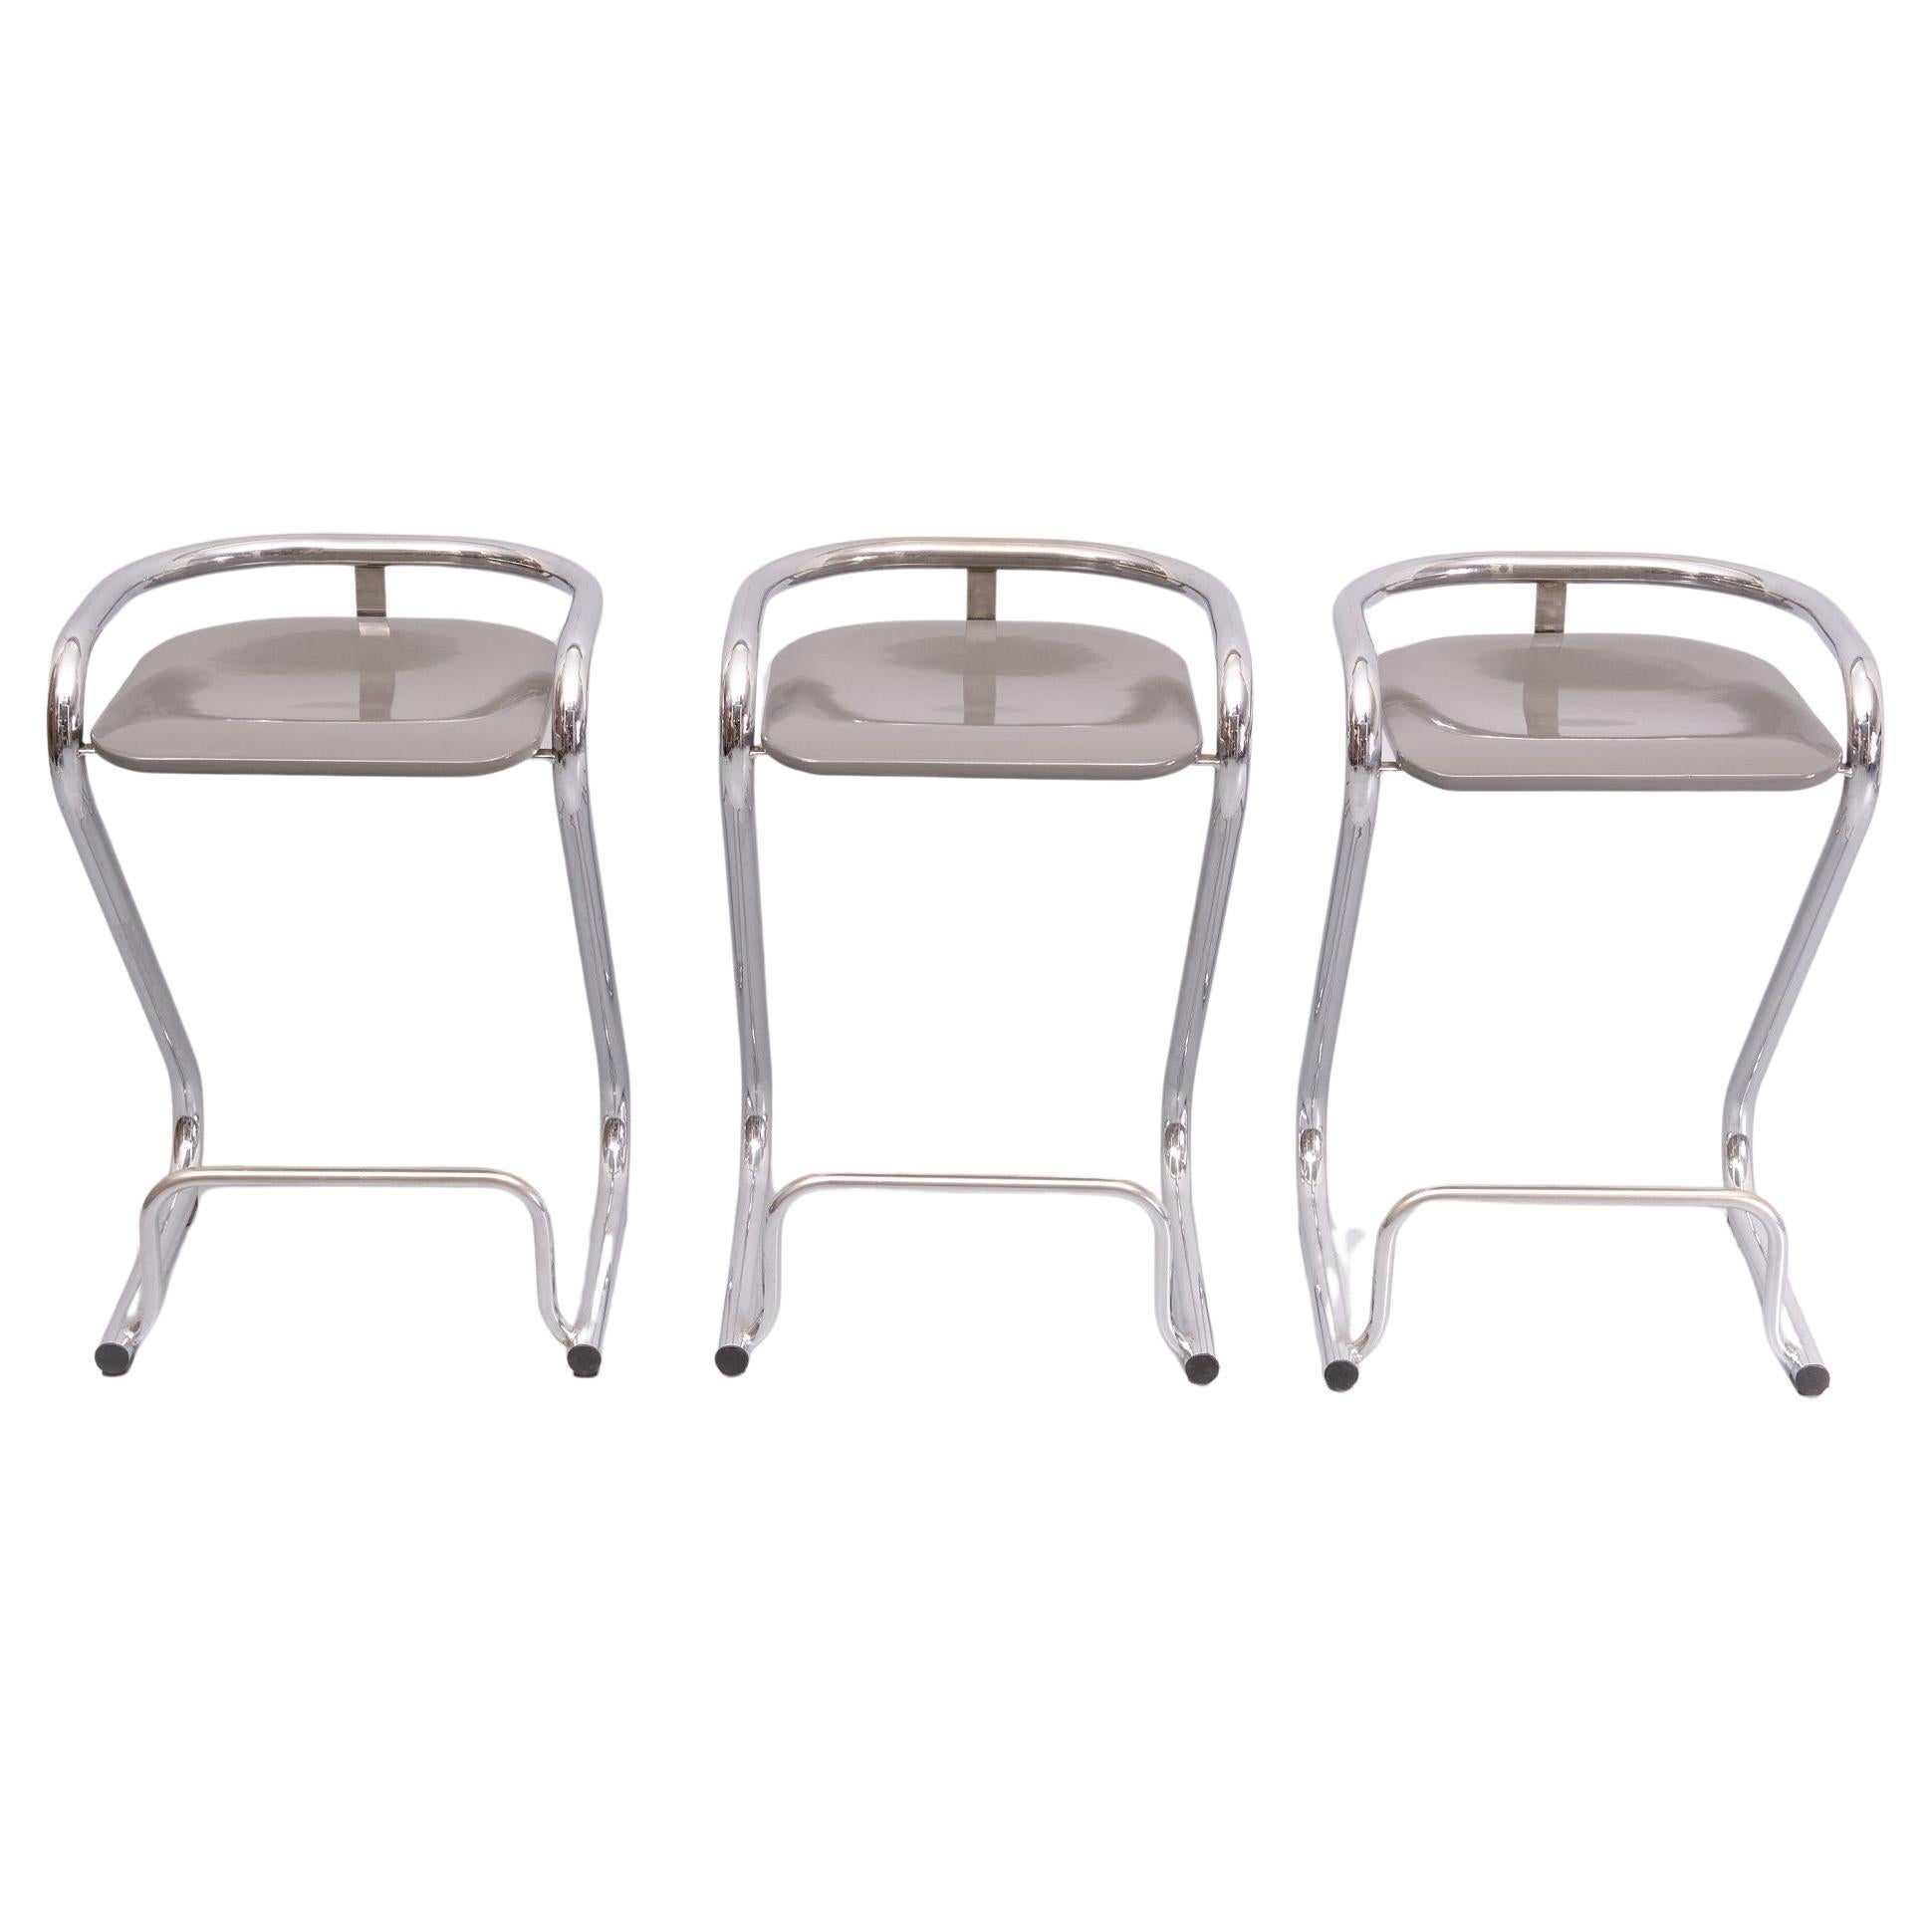 Set of 3 Bar stools S70-3 by Borge Lindau & Bo Lindekrantz for Lammhults  1960  In Good Condition For Sale In Den Haag, NL